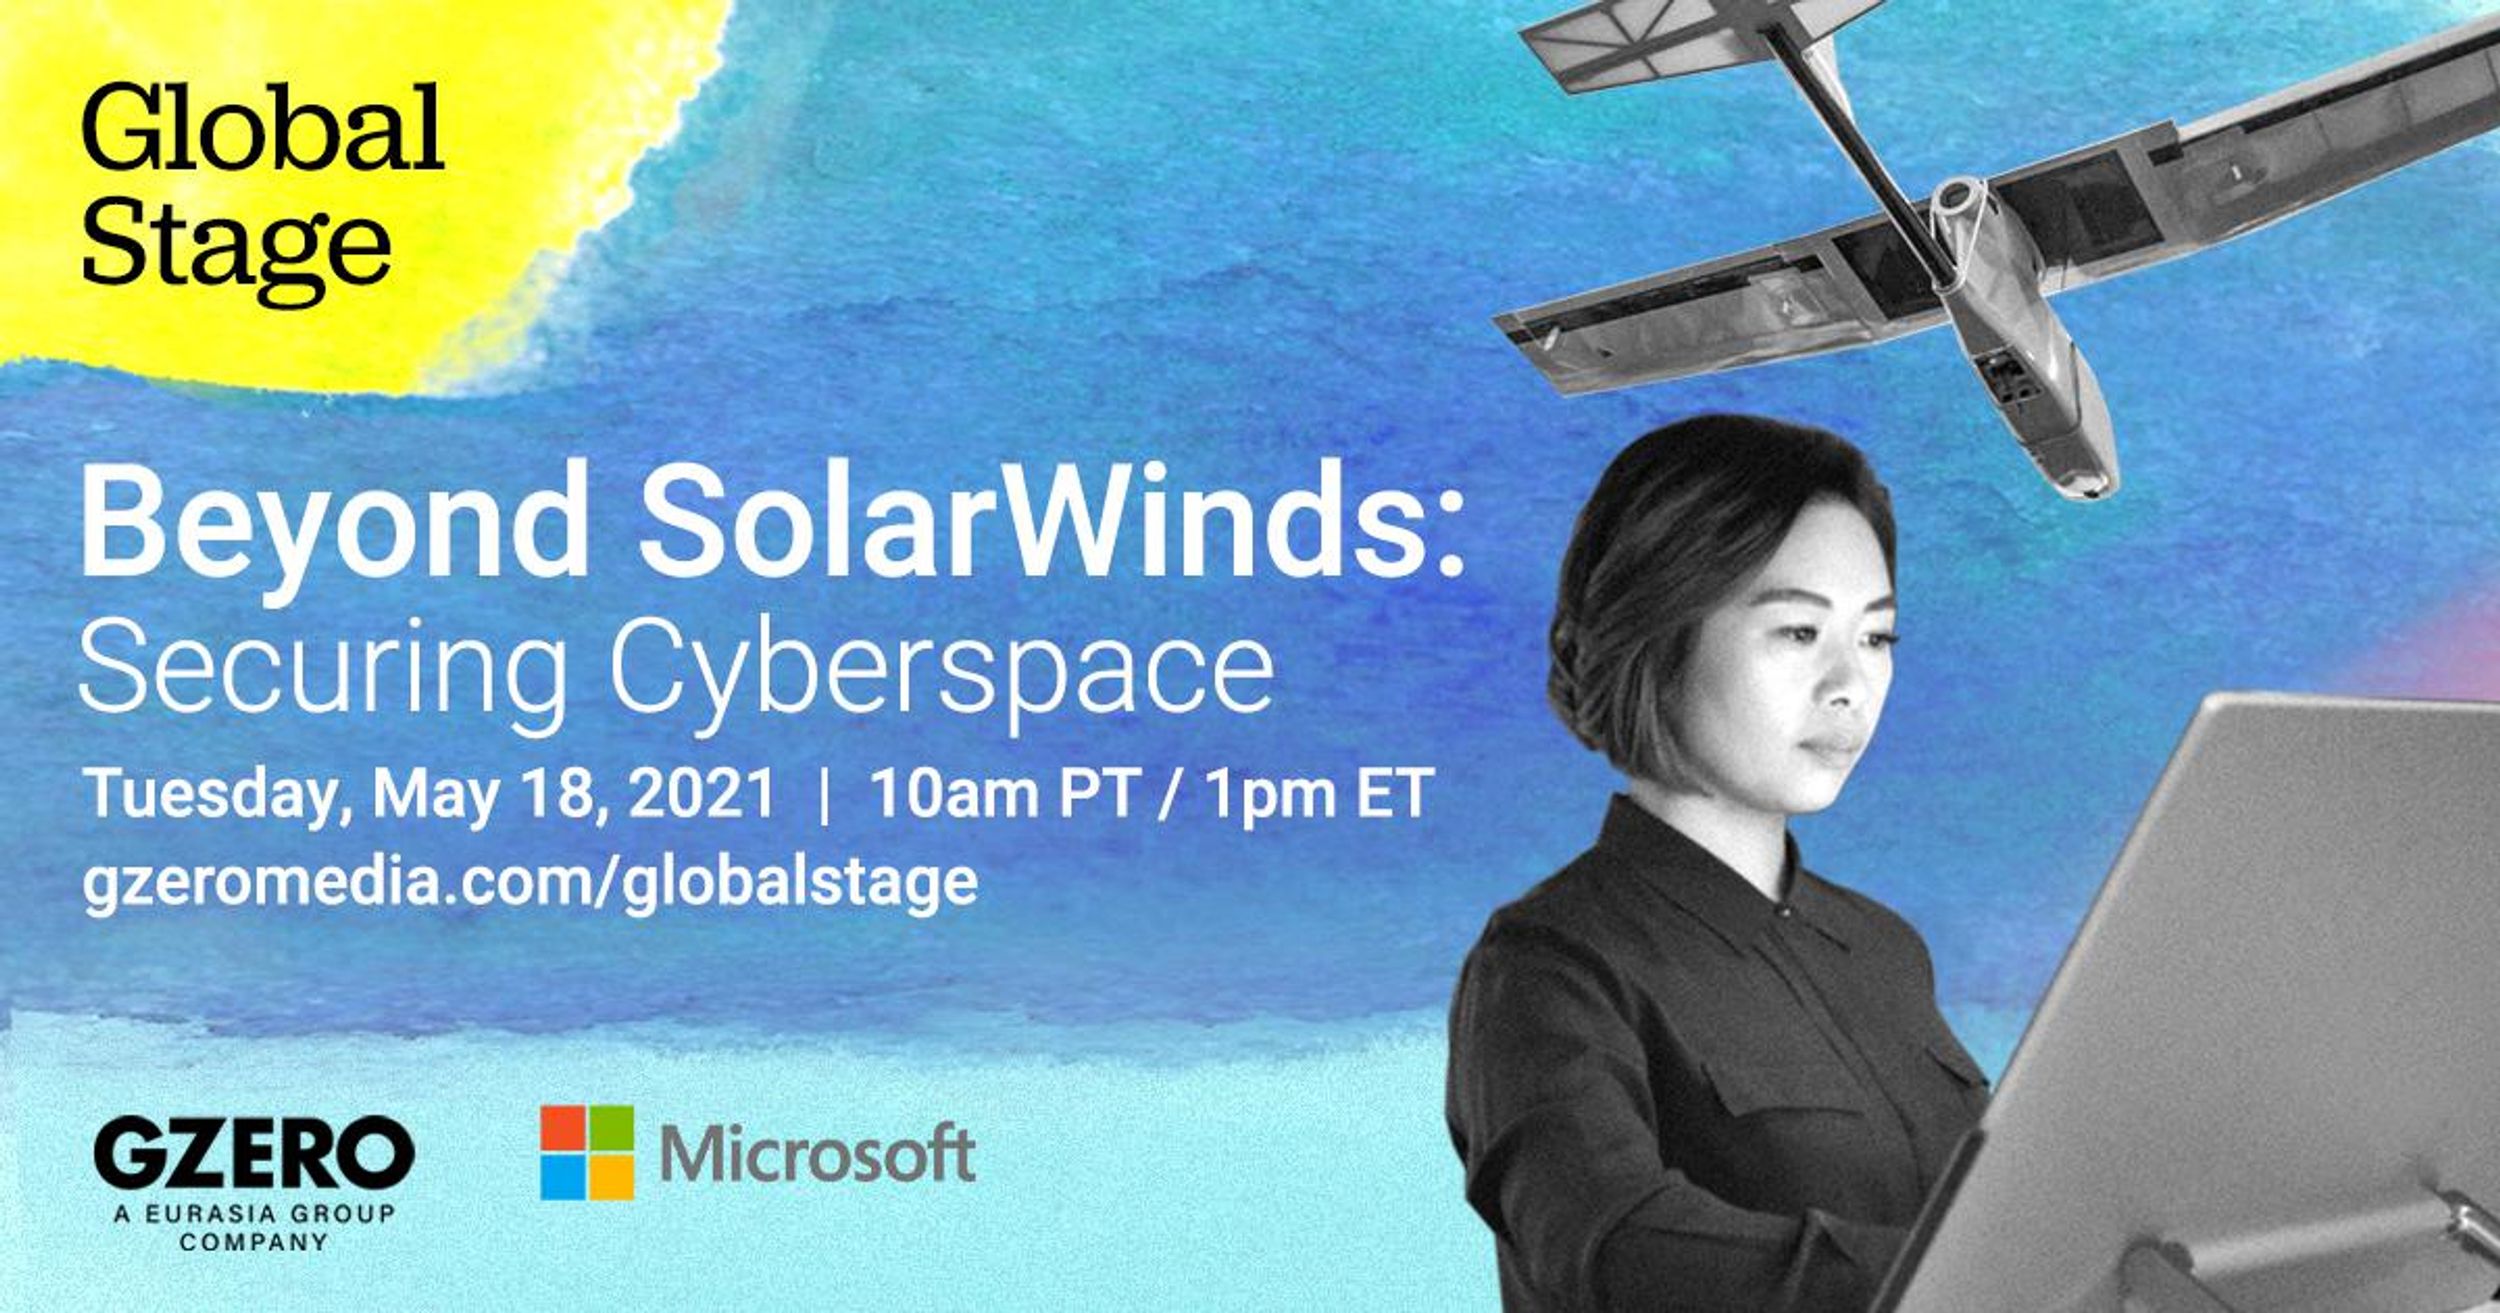 Beyond SolarWinds: Securing Cyberspace | Tuesday, May 18. 2021 | 10am PT / 1pm ET